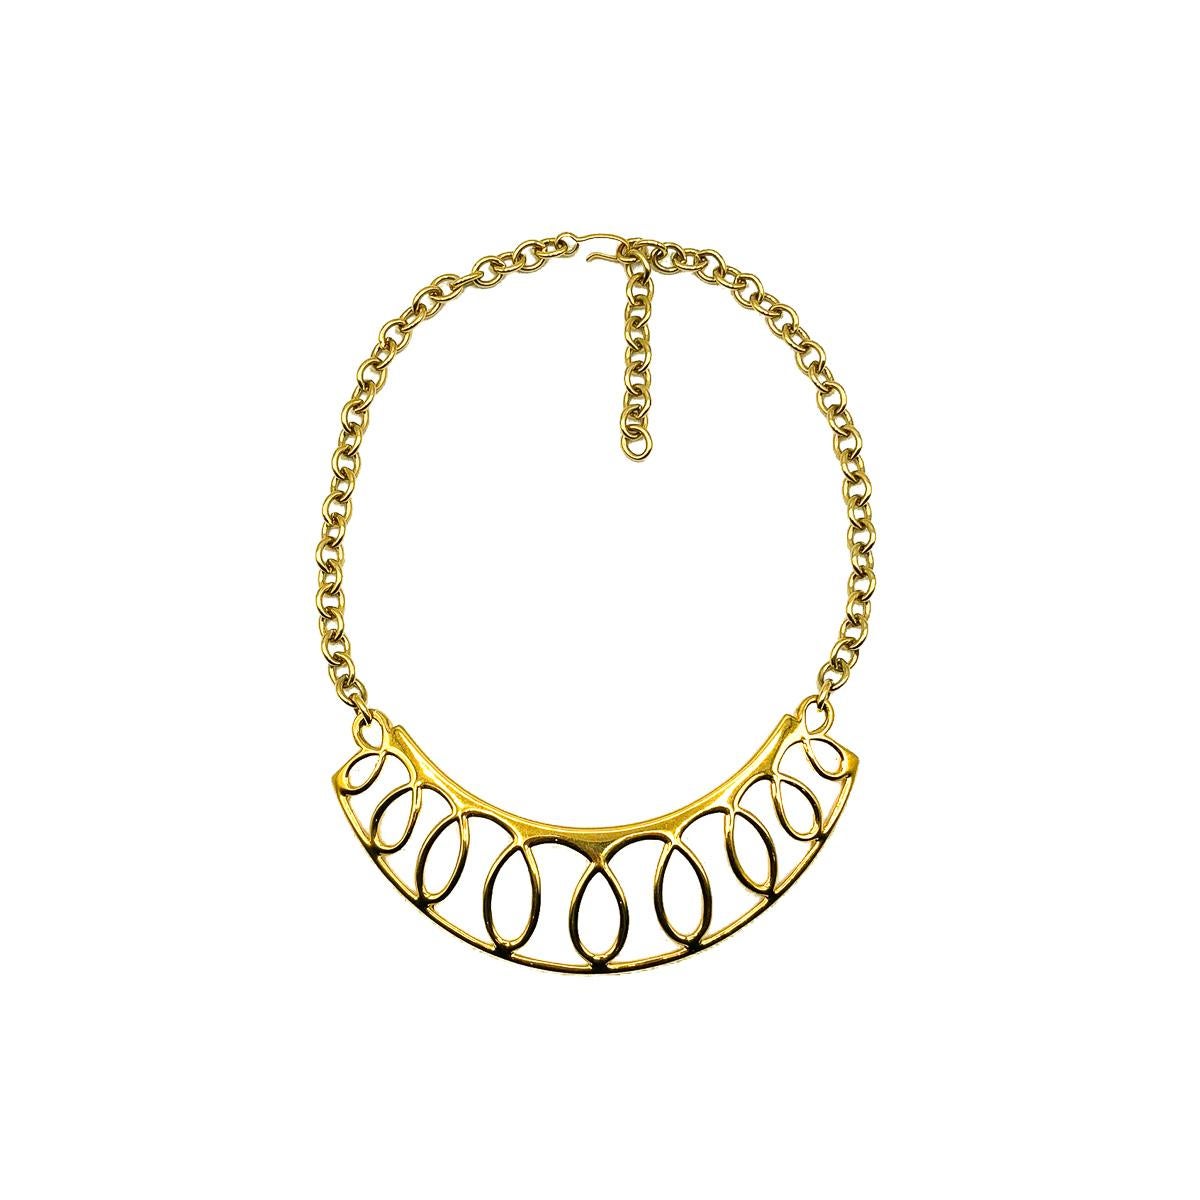 A Vintage Monet Loop Necklace. A stylish chunky currb chain gives way to an impressive loop design collar front for dramatic effect. 
Vintage Condition: Very good without damage or noteworthy wear 
Materials: Gold Plated Metal
Signed: